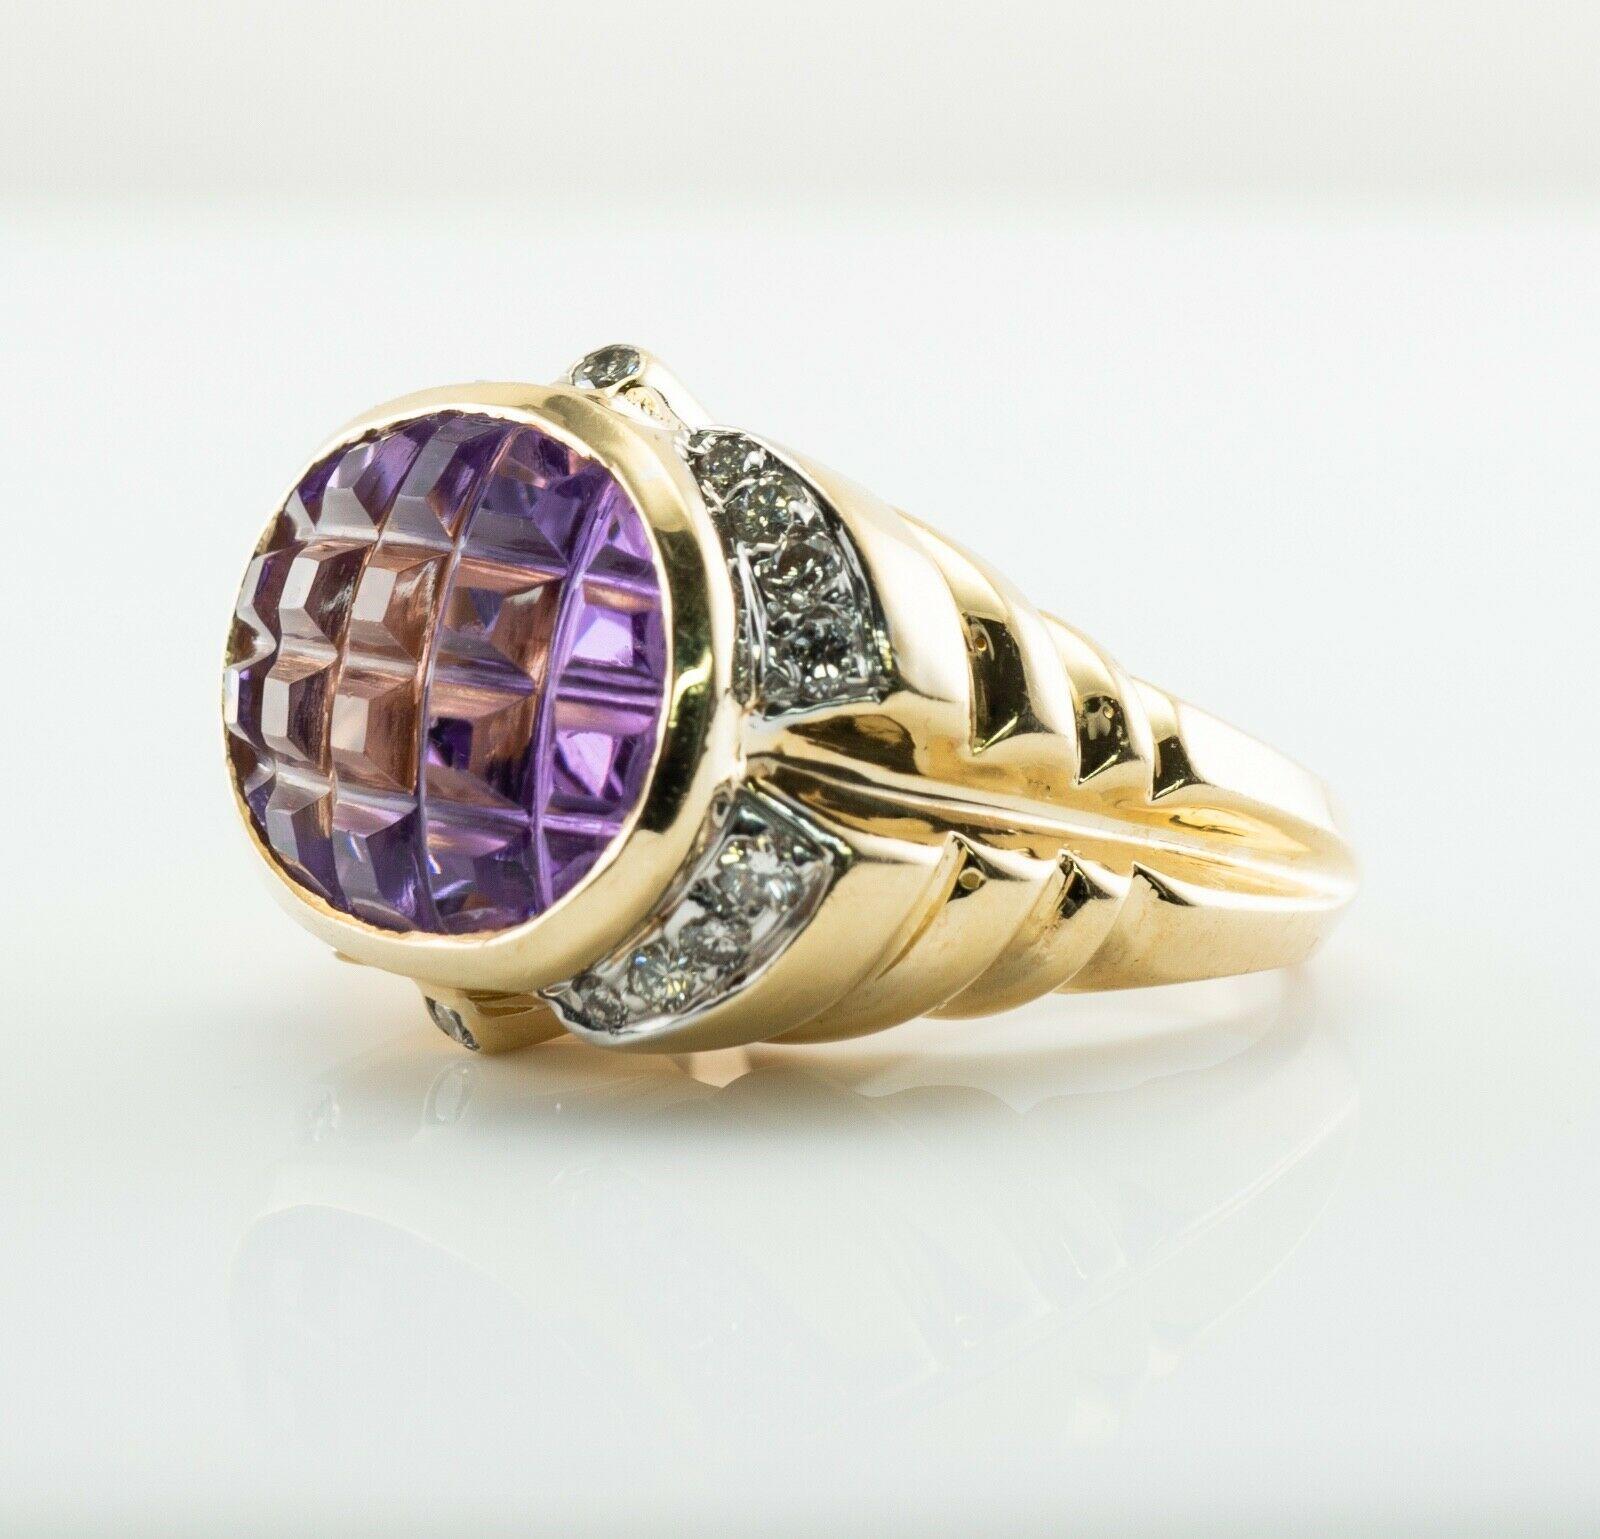 This spectacular vintage ring is finely crafted in solid 14K Yellow Gold (carefully tested and guaranteed), and set with natural Earth mined Amethyst gemstones and diamonds. Twenty old cut amethysts are very clean stones of great intensity. Eighteen